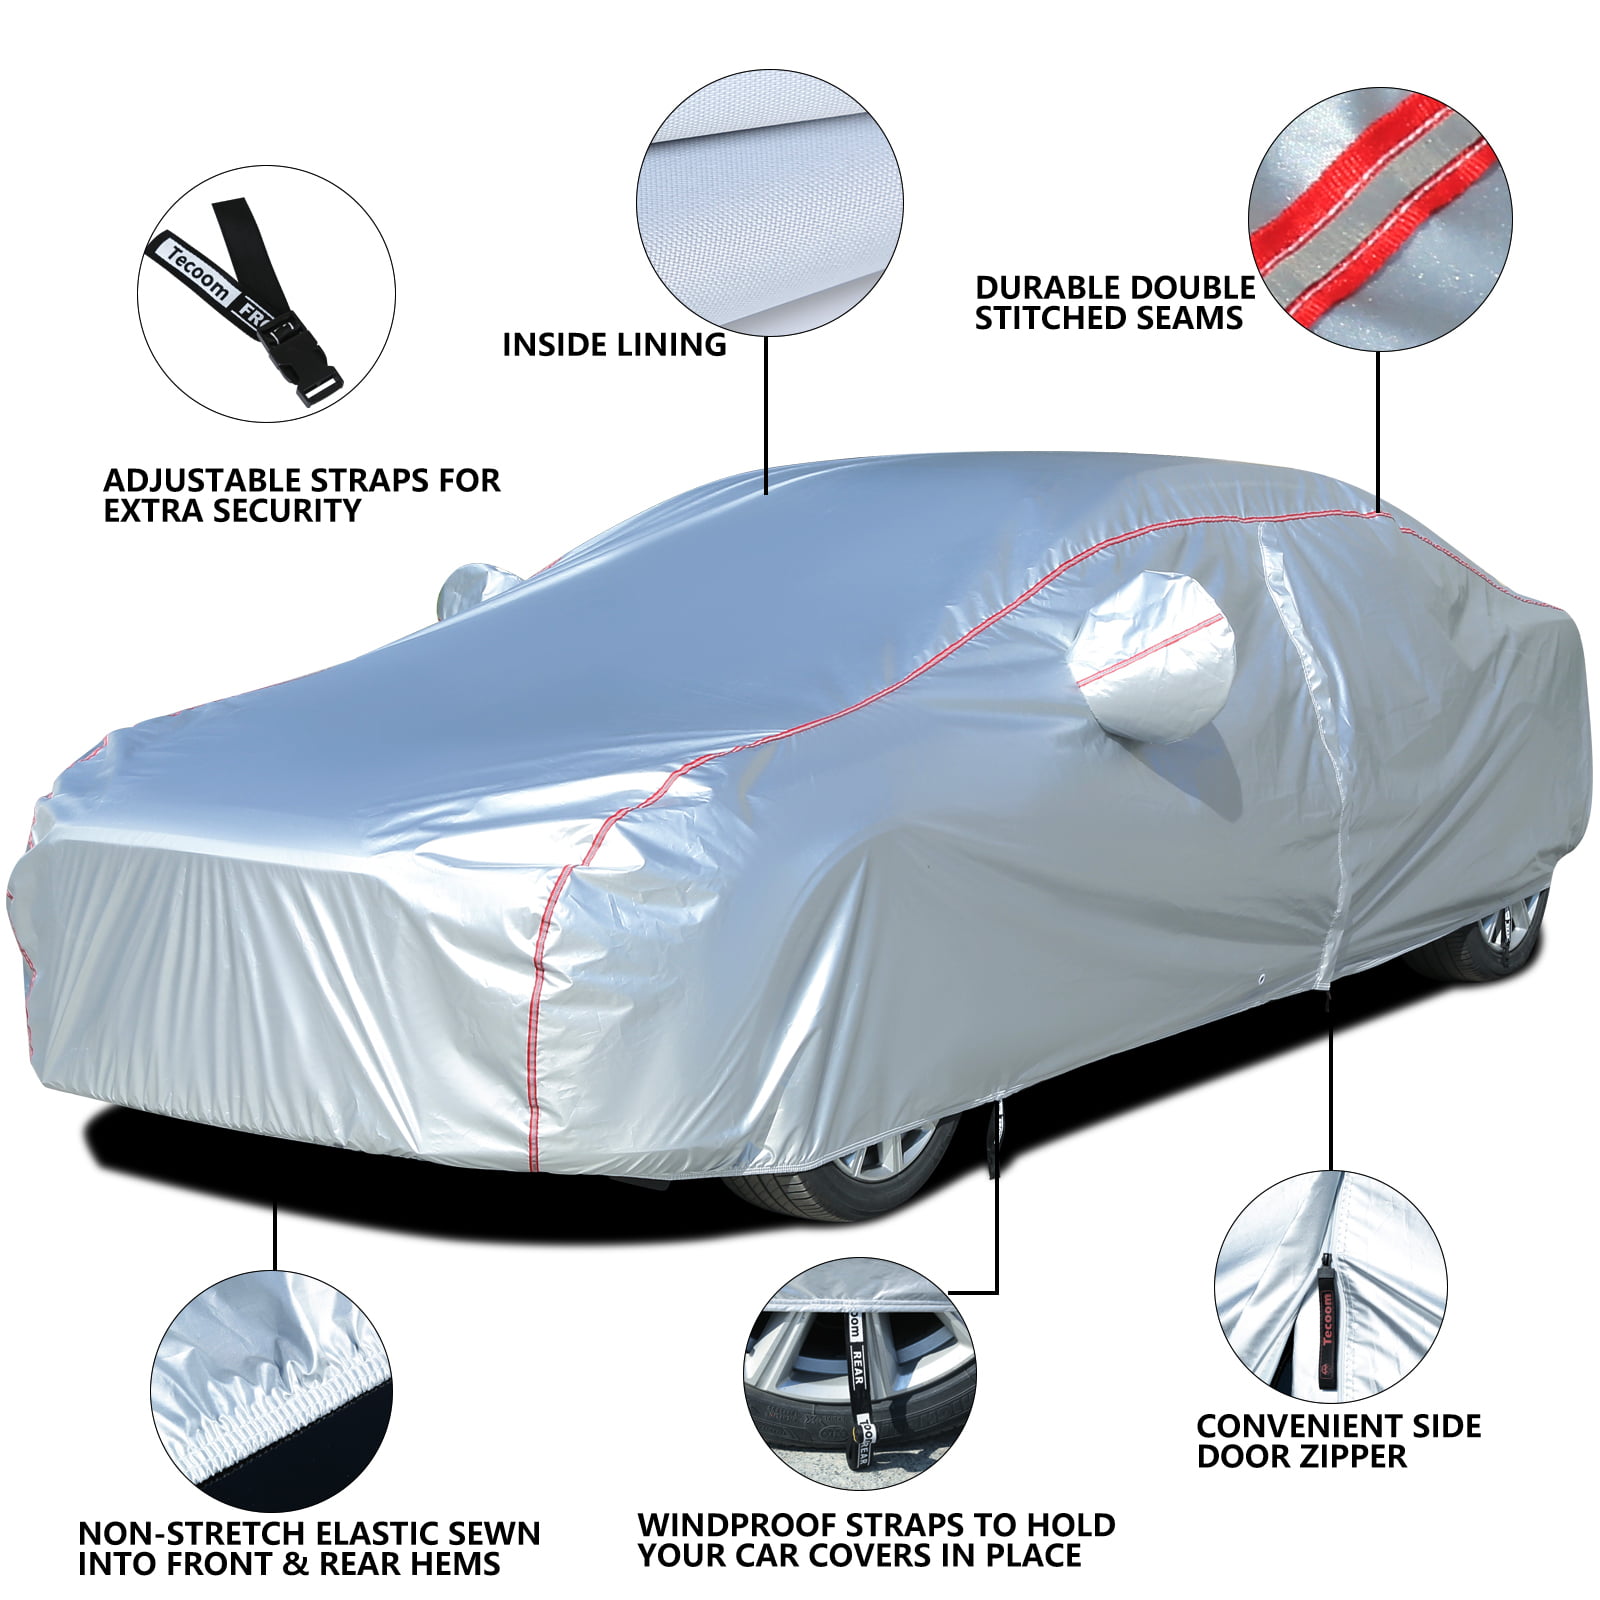 WINTER WATERPROOF FULL CAR COVER COTTON LINED FOR VW PASSAT CC 